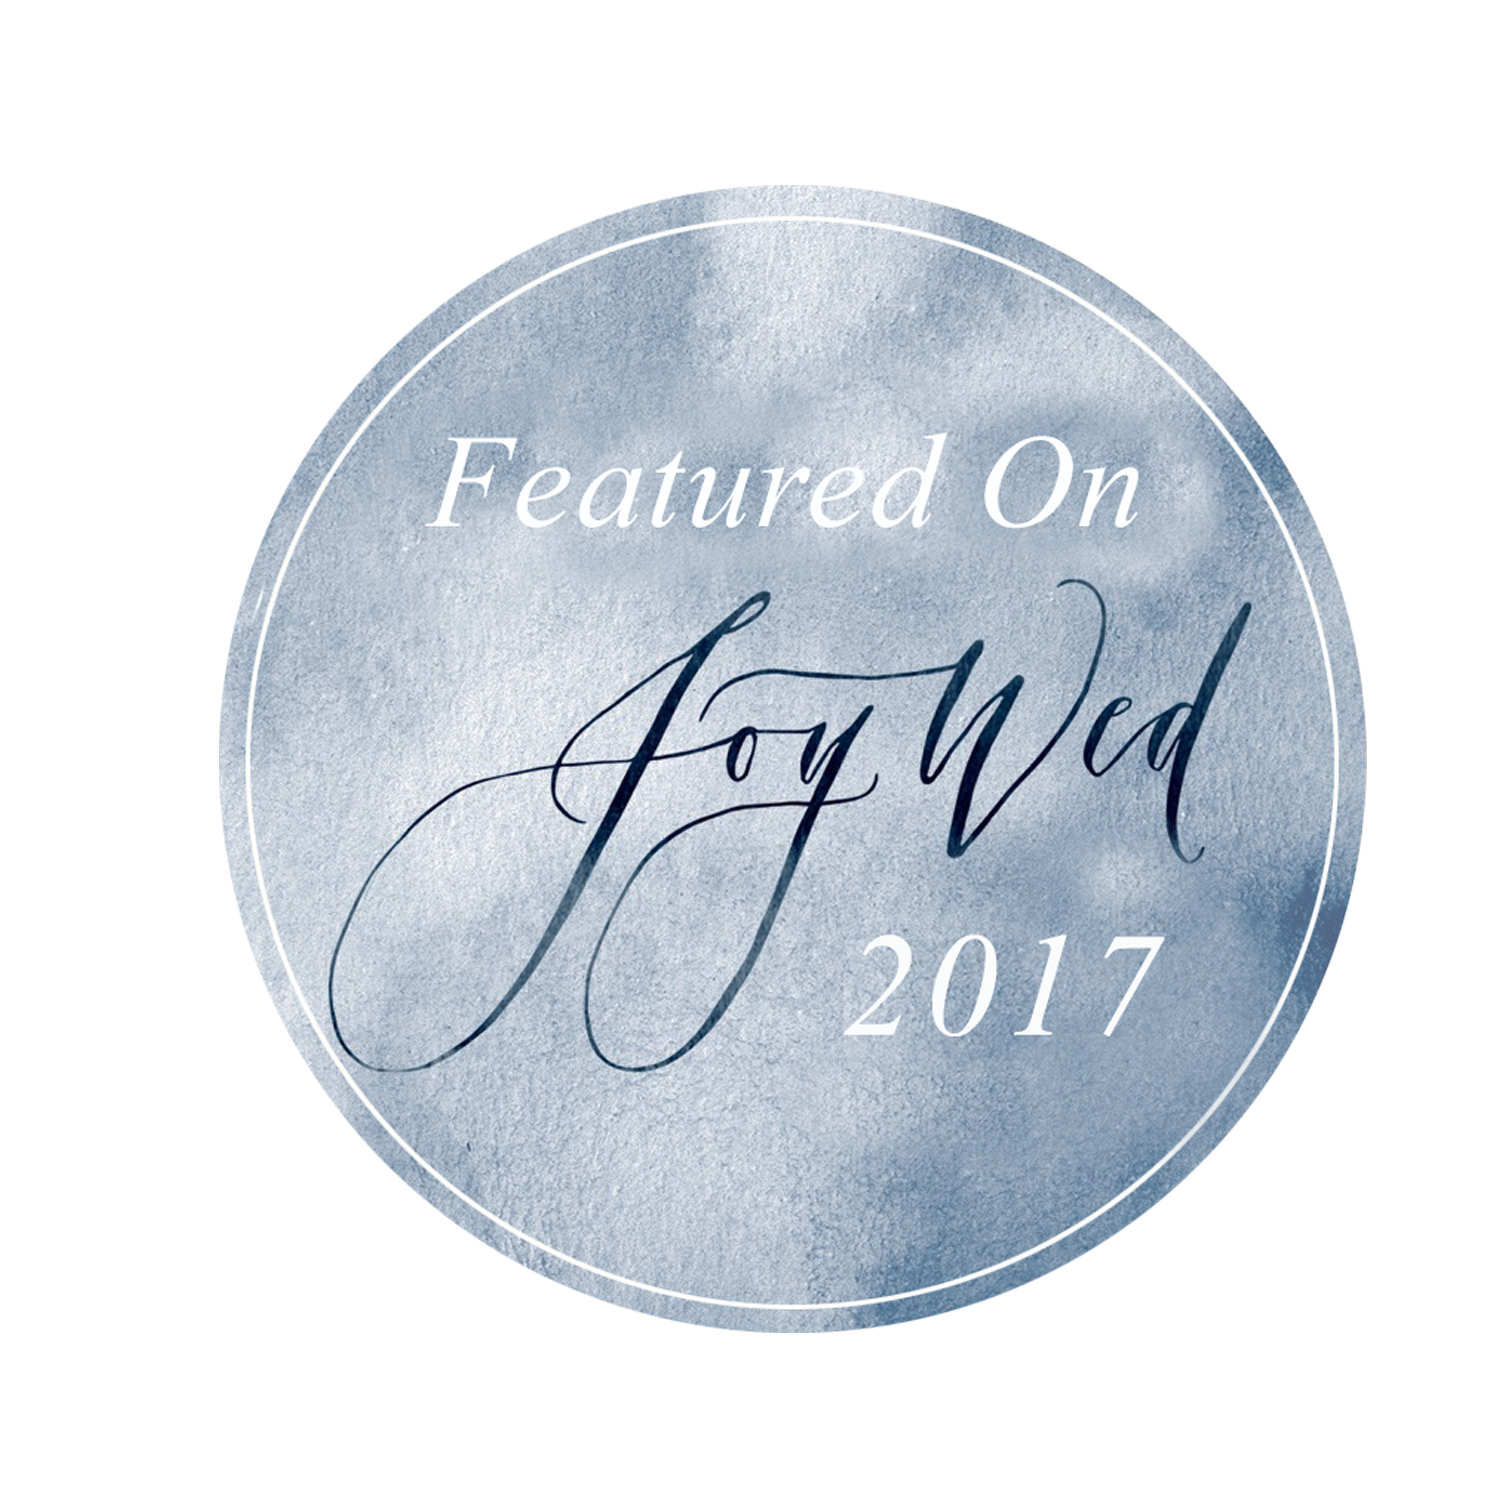 Joy Wed Badge- Featured On 2017.png